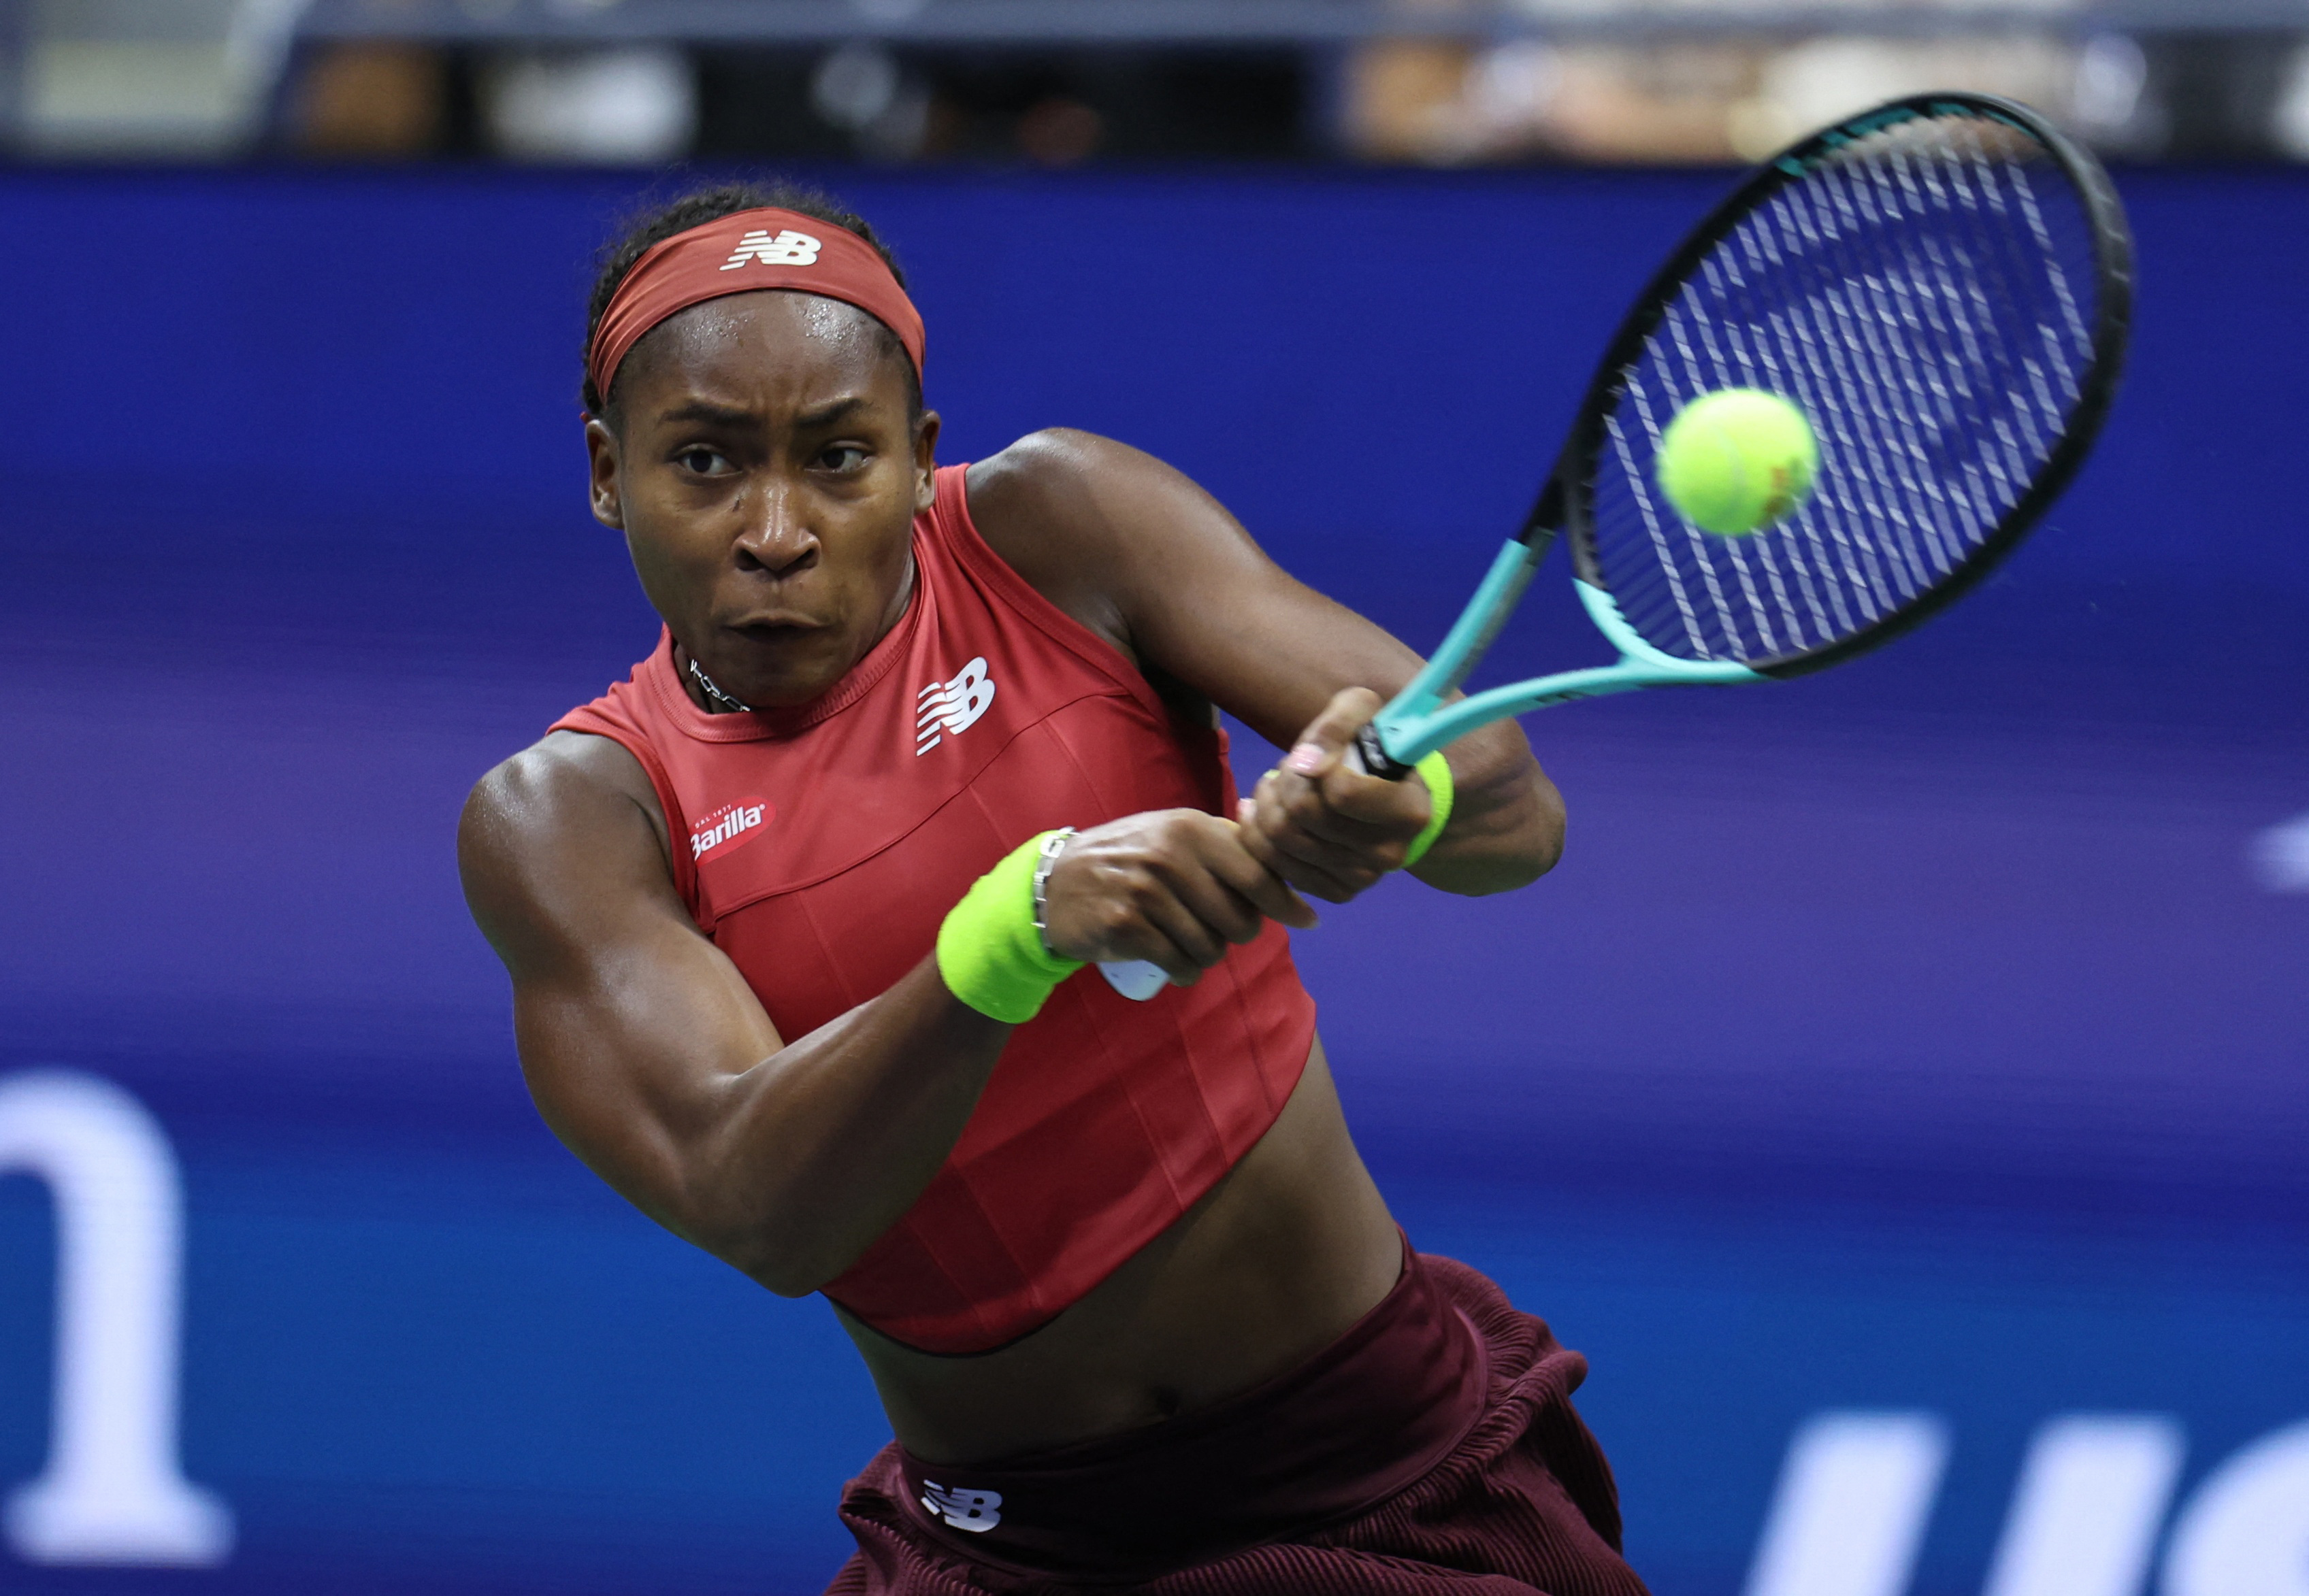 American Coco Gauff clinches first U.S. Open final appearance